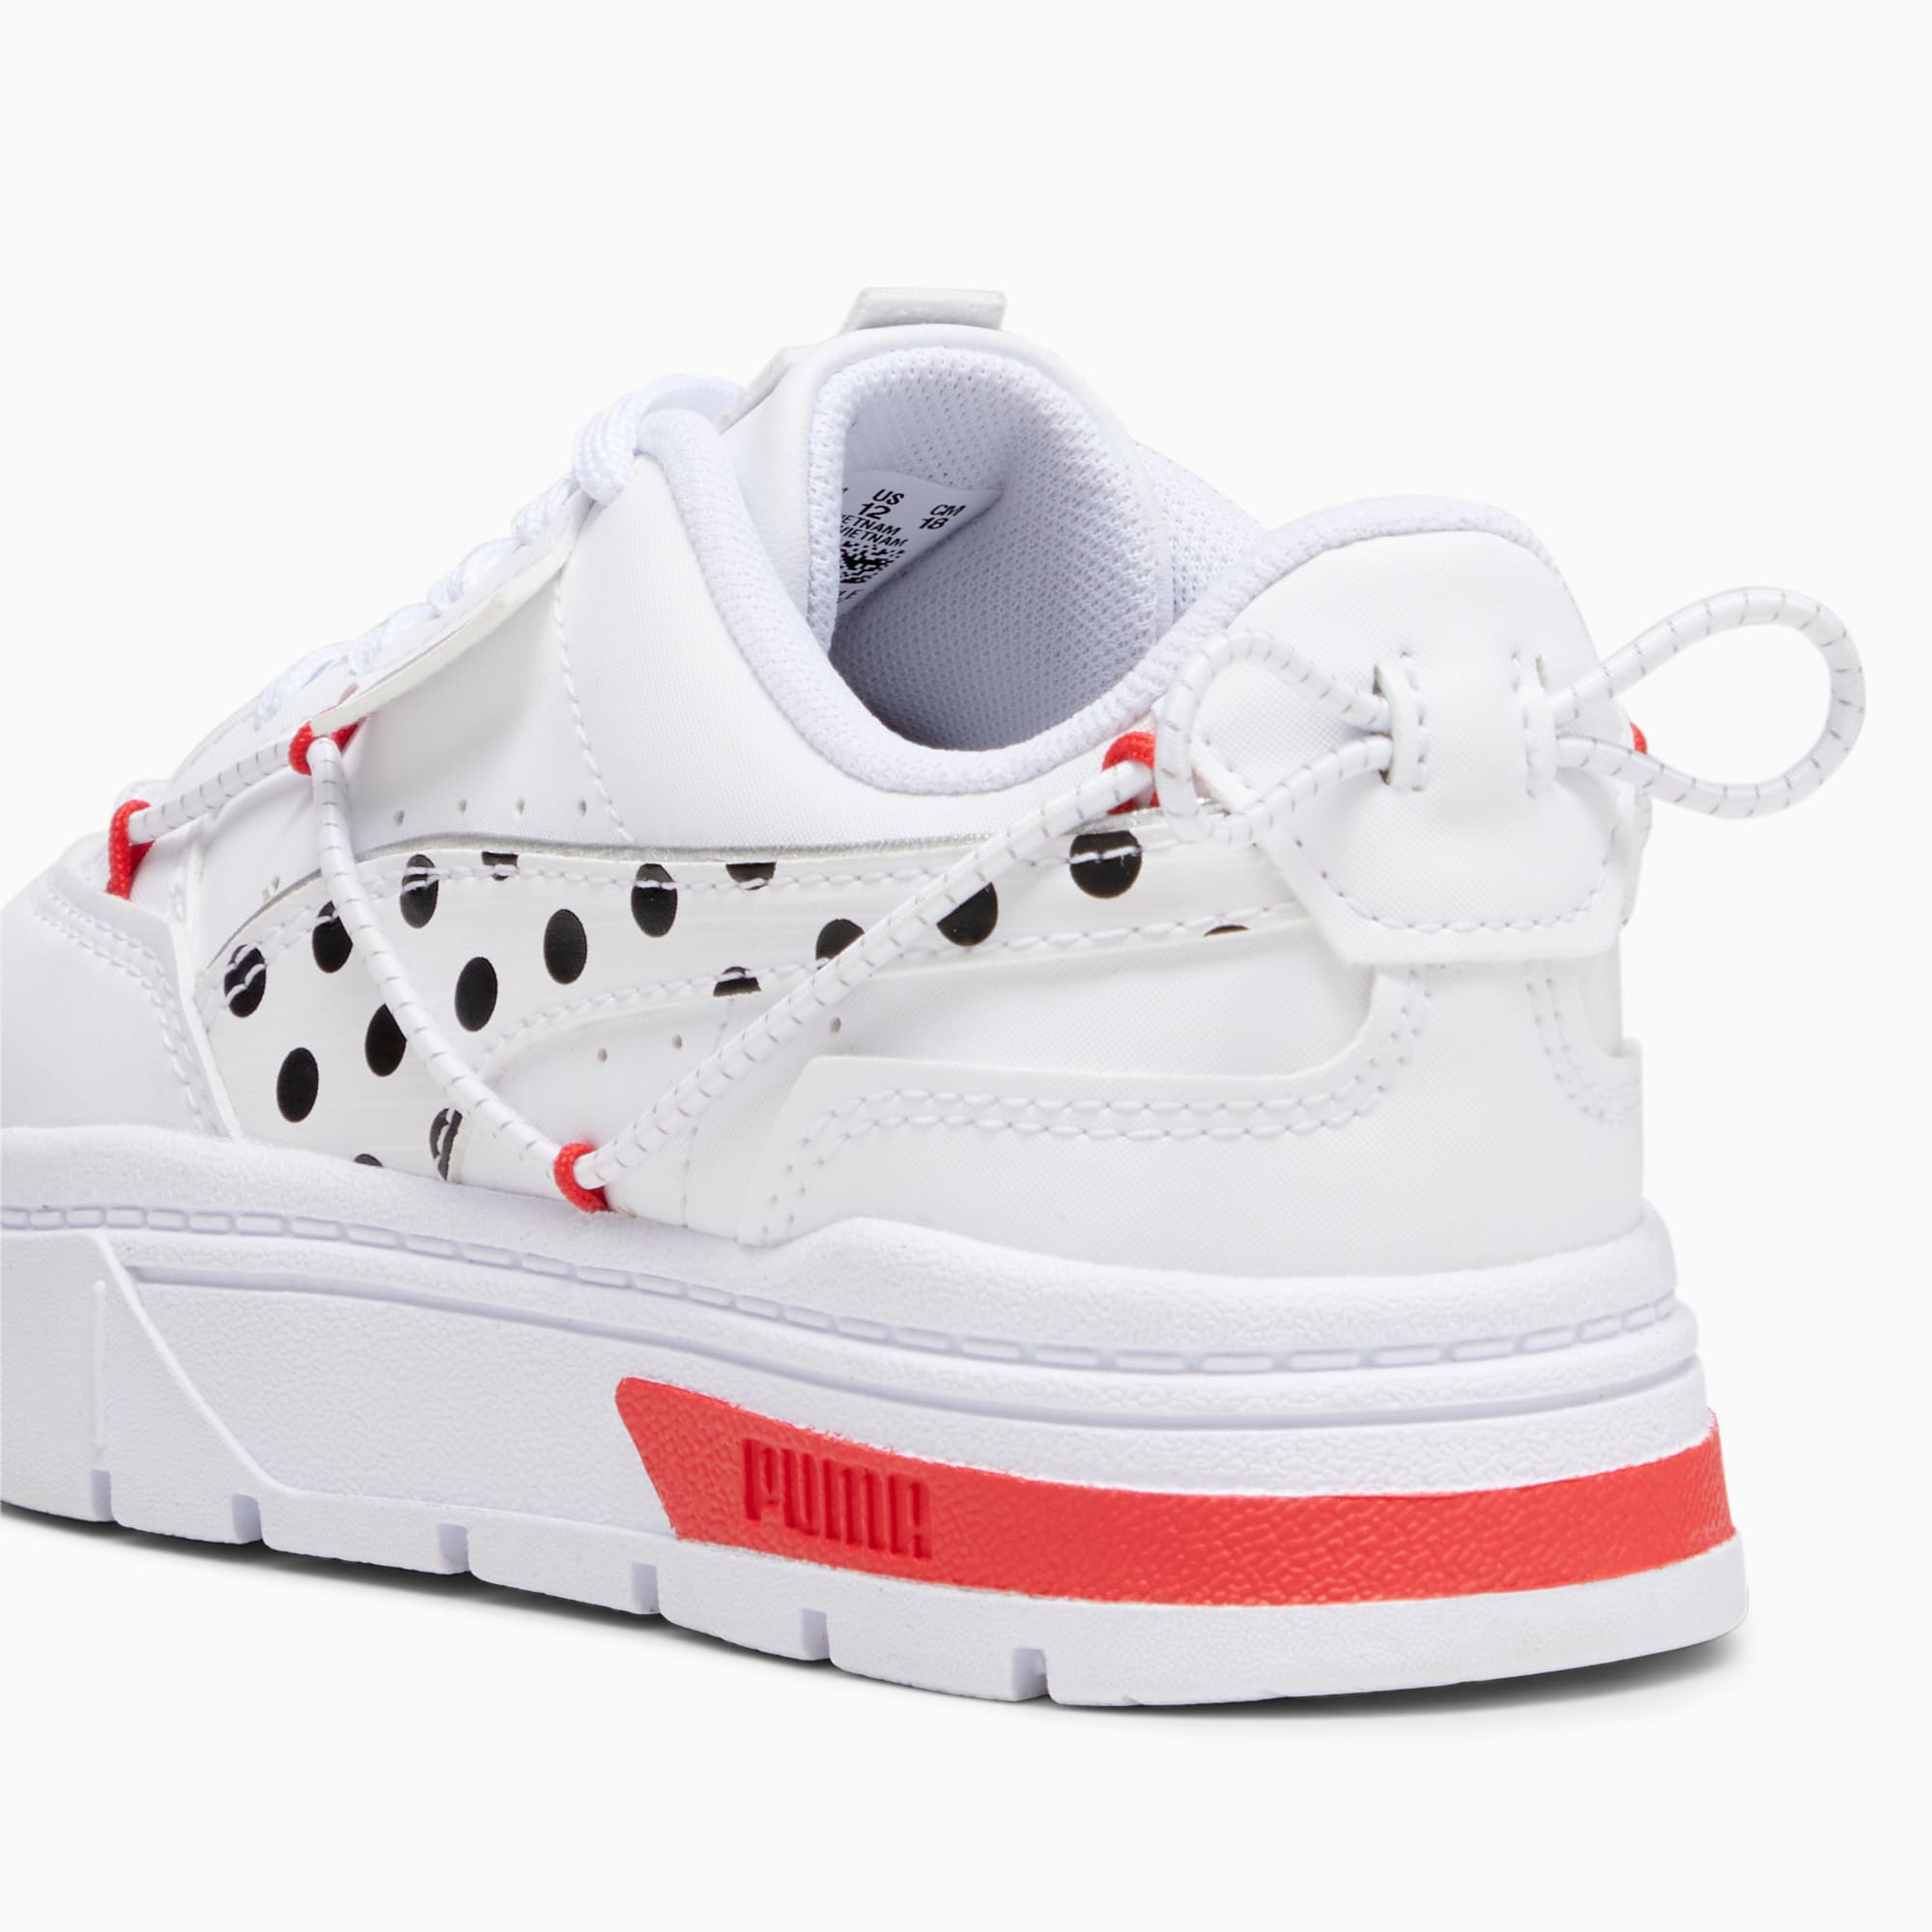 PUMA X Miraculous Mayze Stack Kids' Sneakers, White/Red